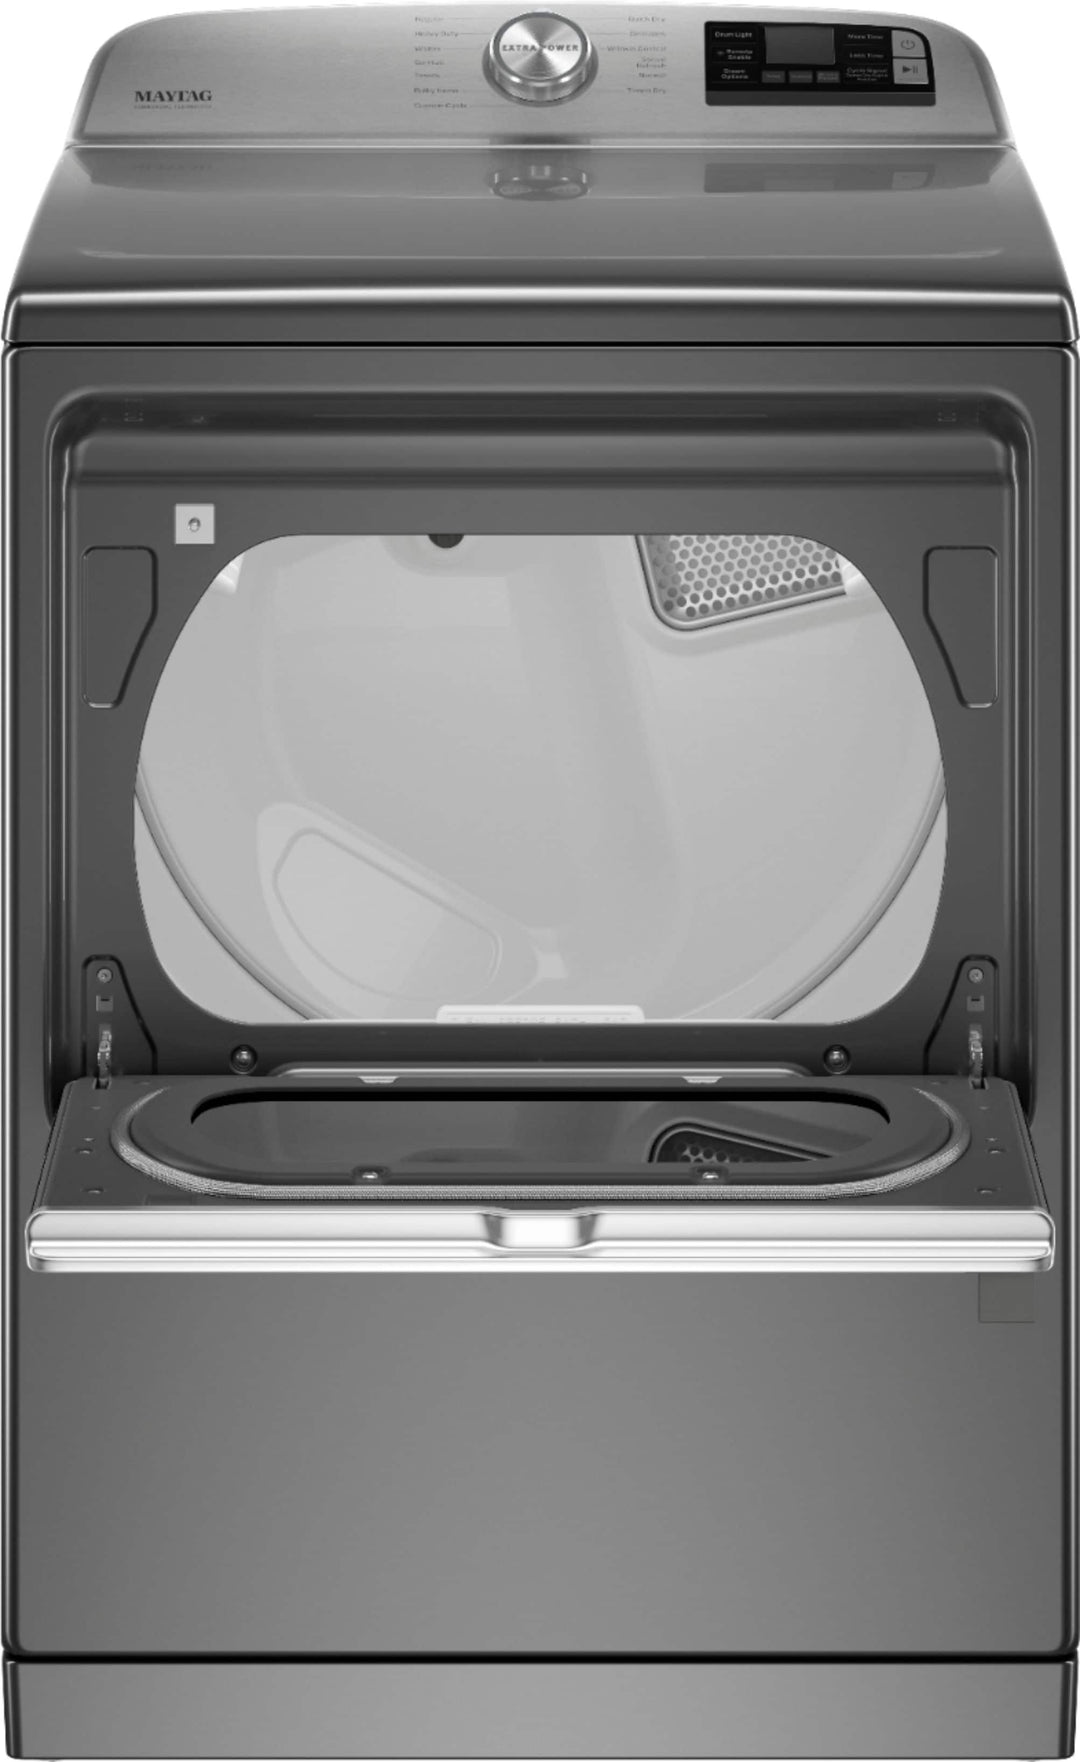 Maytag - 7.4 Cu. Ft. Smart Gas Dryer with Steam and Extra Power Button - Metallic slate_7